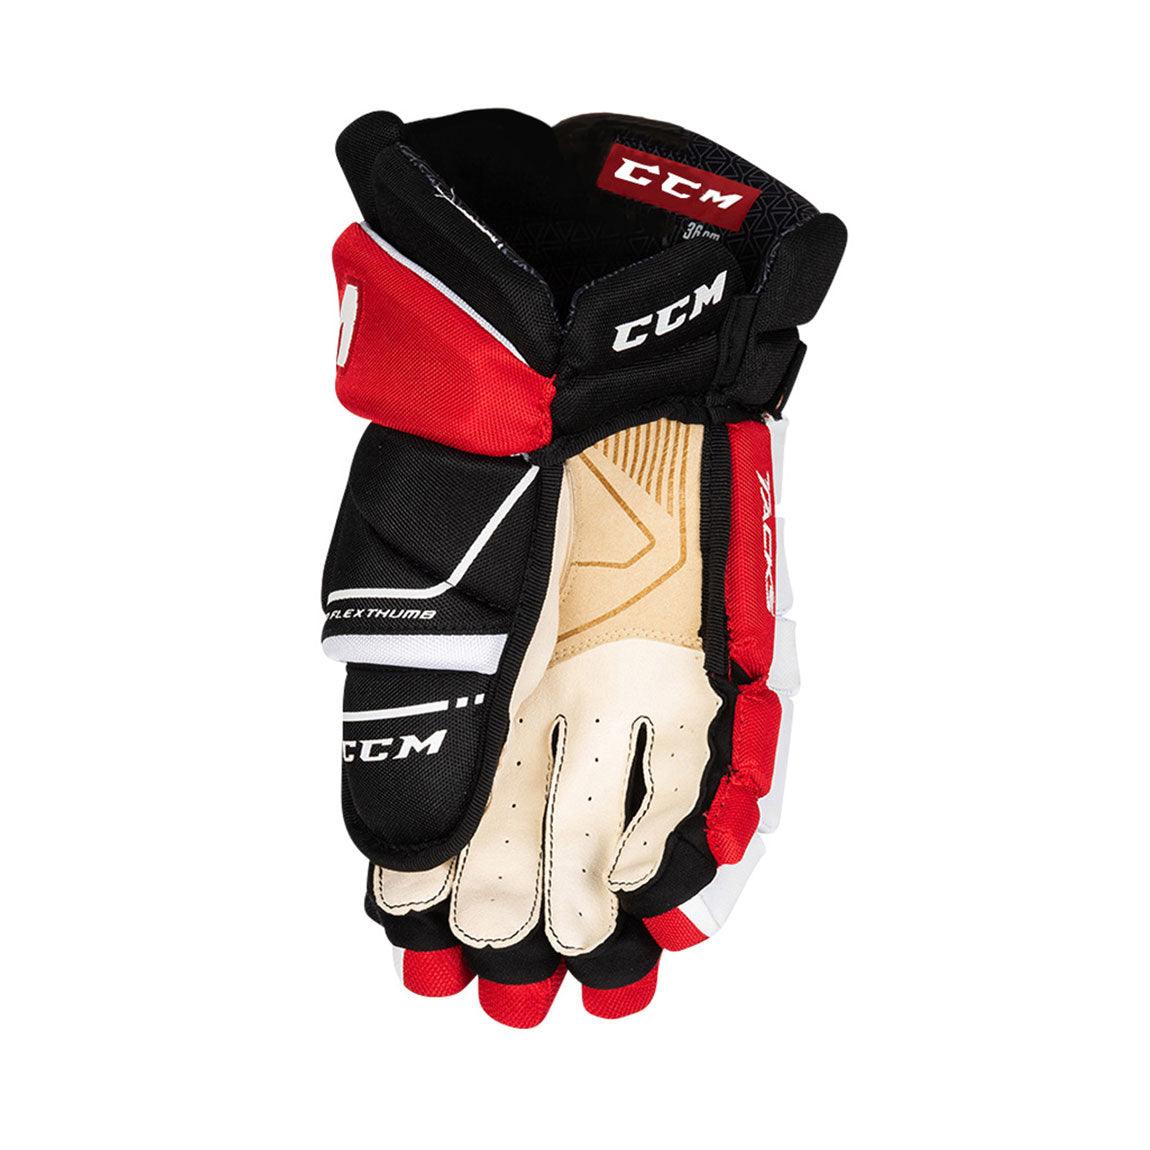 Junior Tacks Classic Pro Hockey Gloves by CCM - second picture